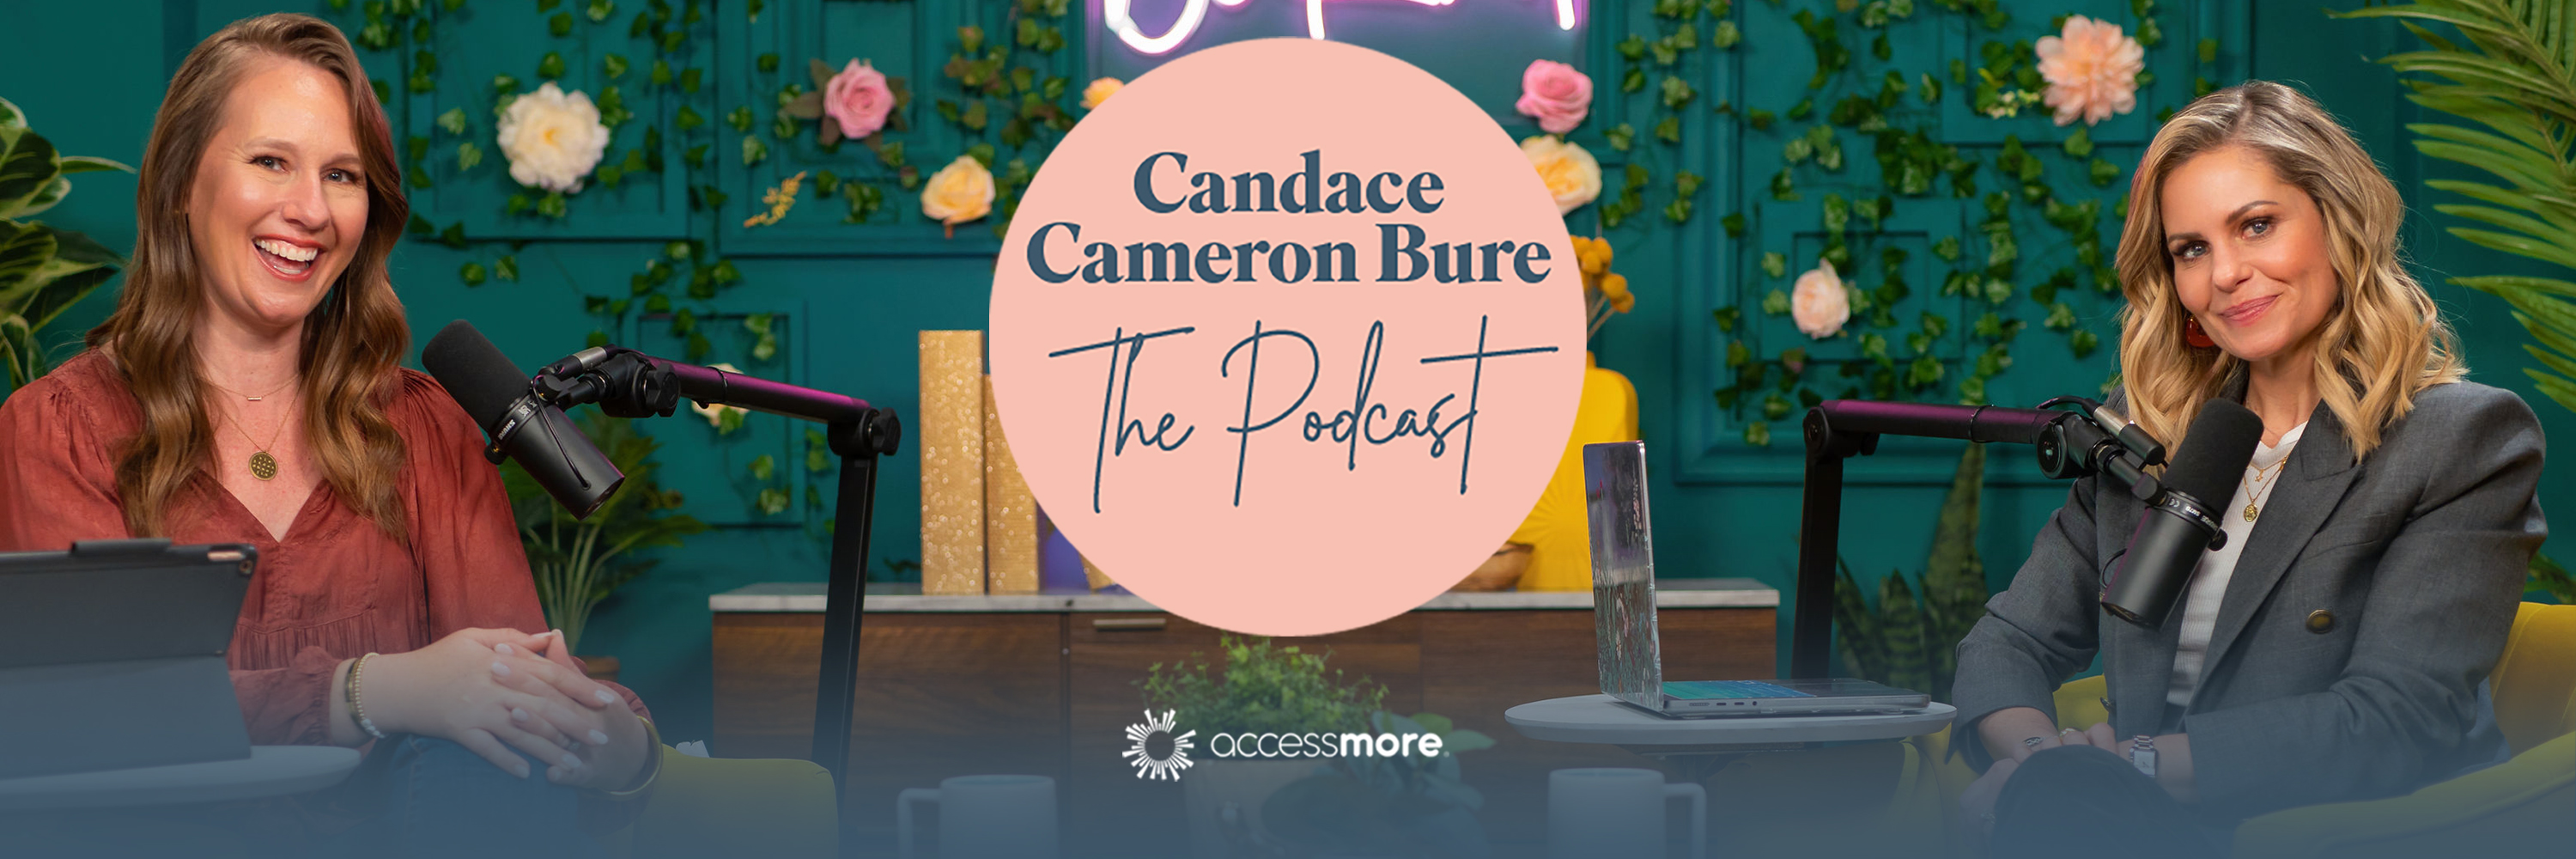 The Candace Cameron Bure Podcast